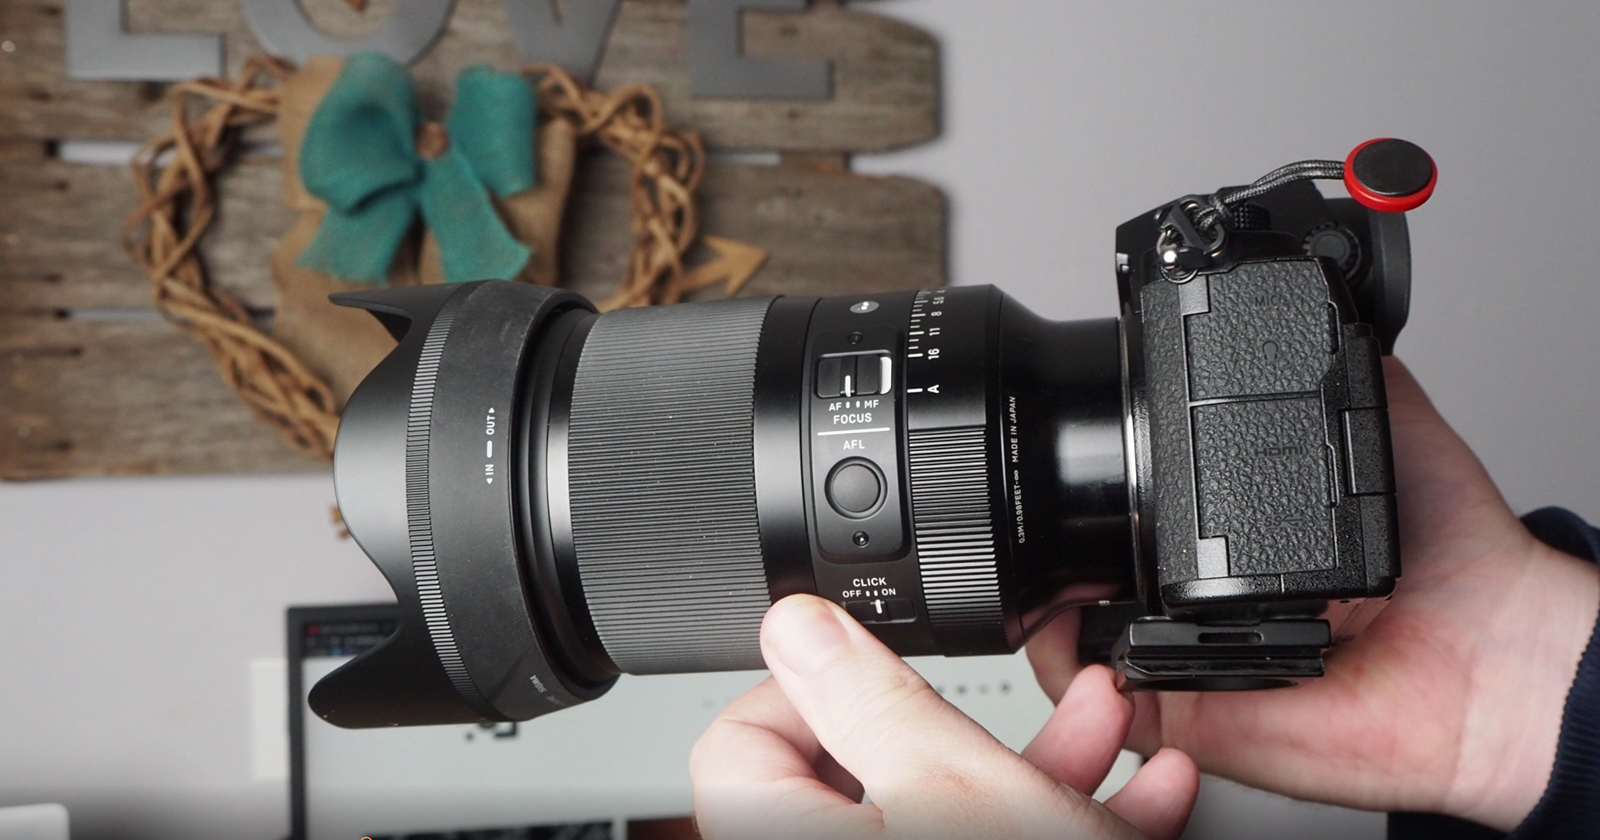 The Sigma 35mm F/1.2 DG DN Art Review: A 35mm prime to rule them all?